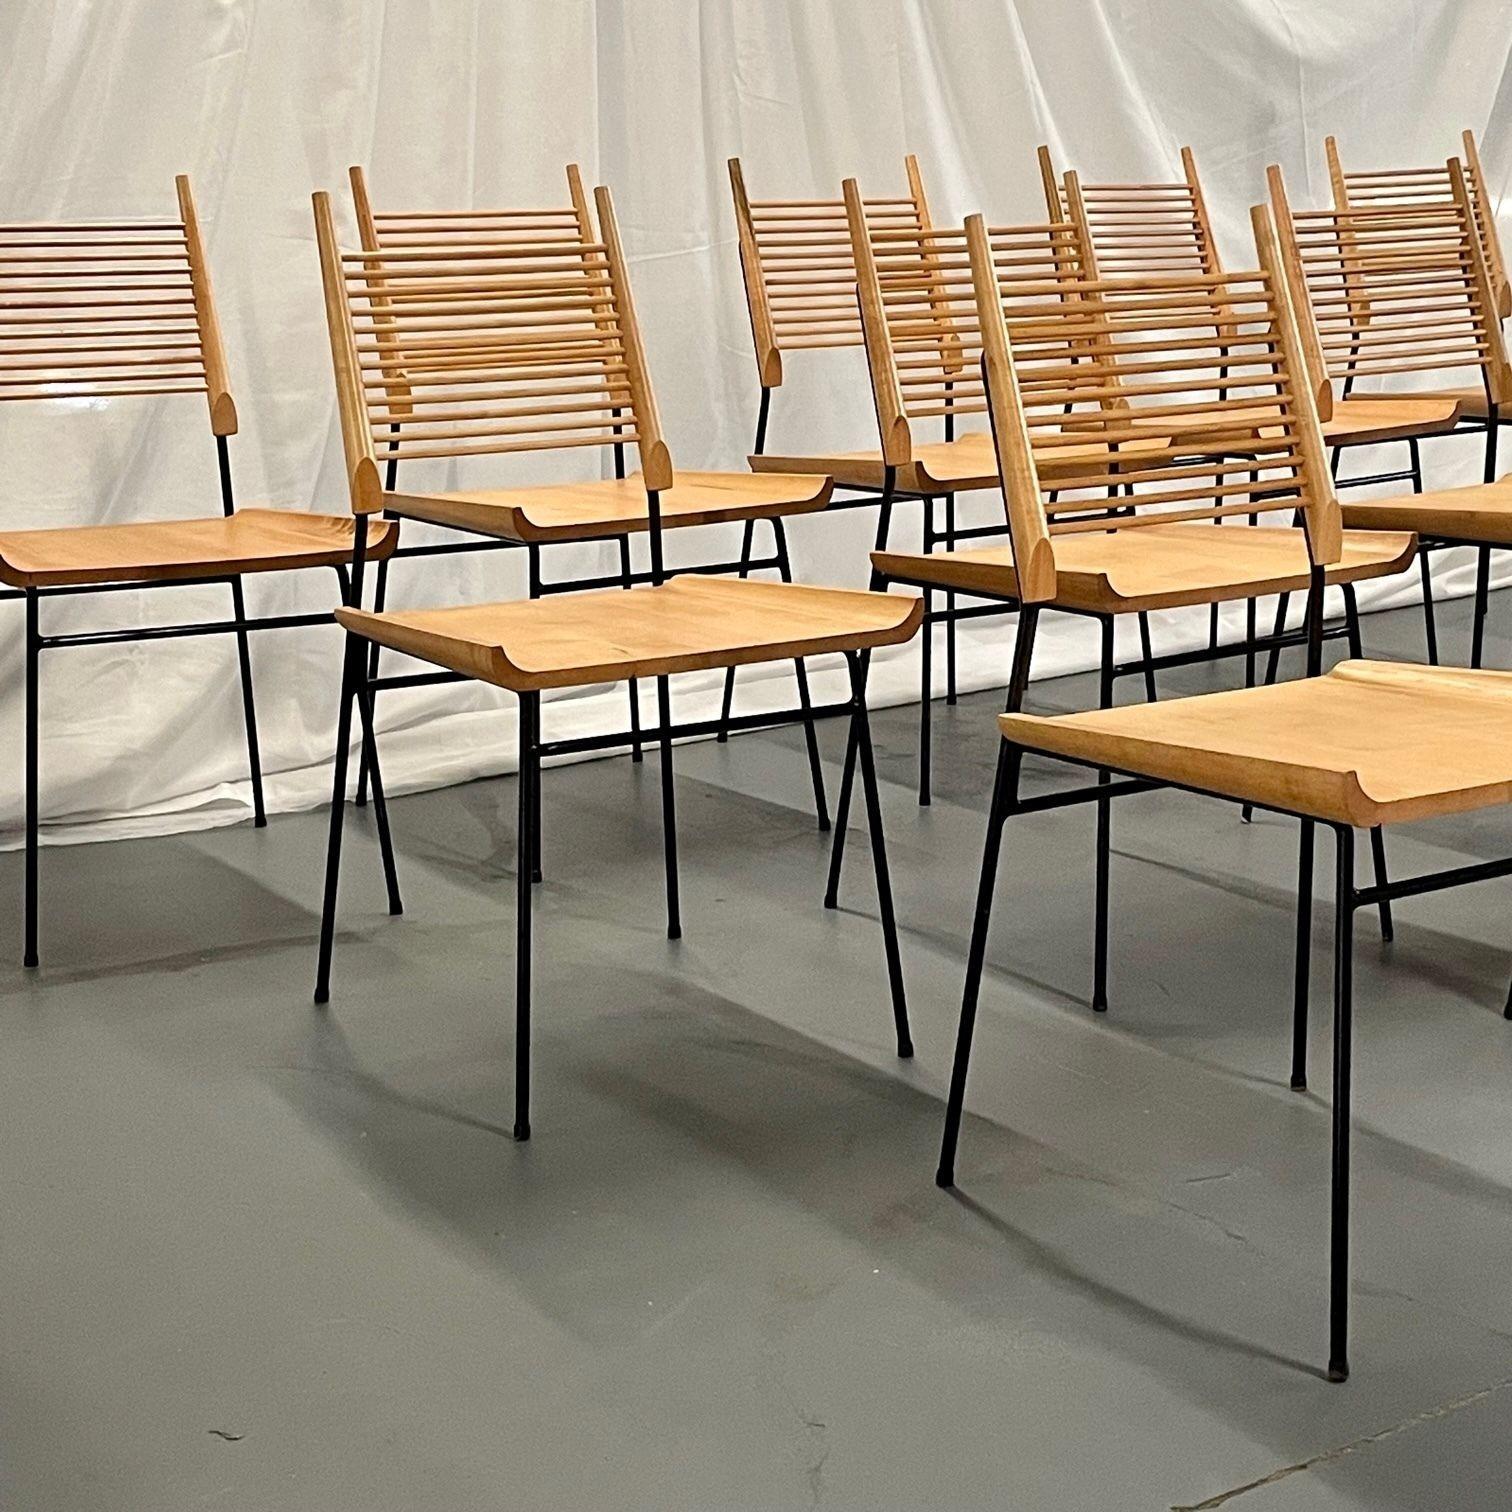 American Set of 12 Mid-Century Modern Paul McCobb Side / Dining Chairs, 'Shovel' Chairs For Sale